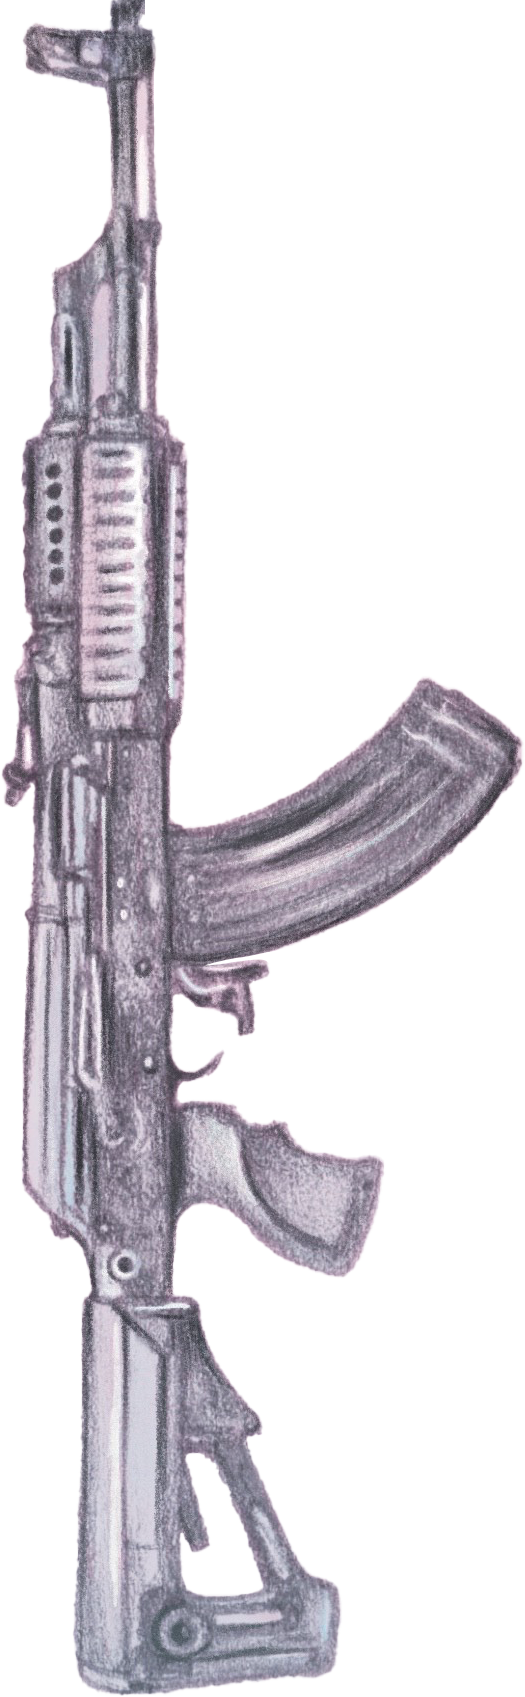 drawing of a semi-automatic weapon